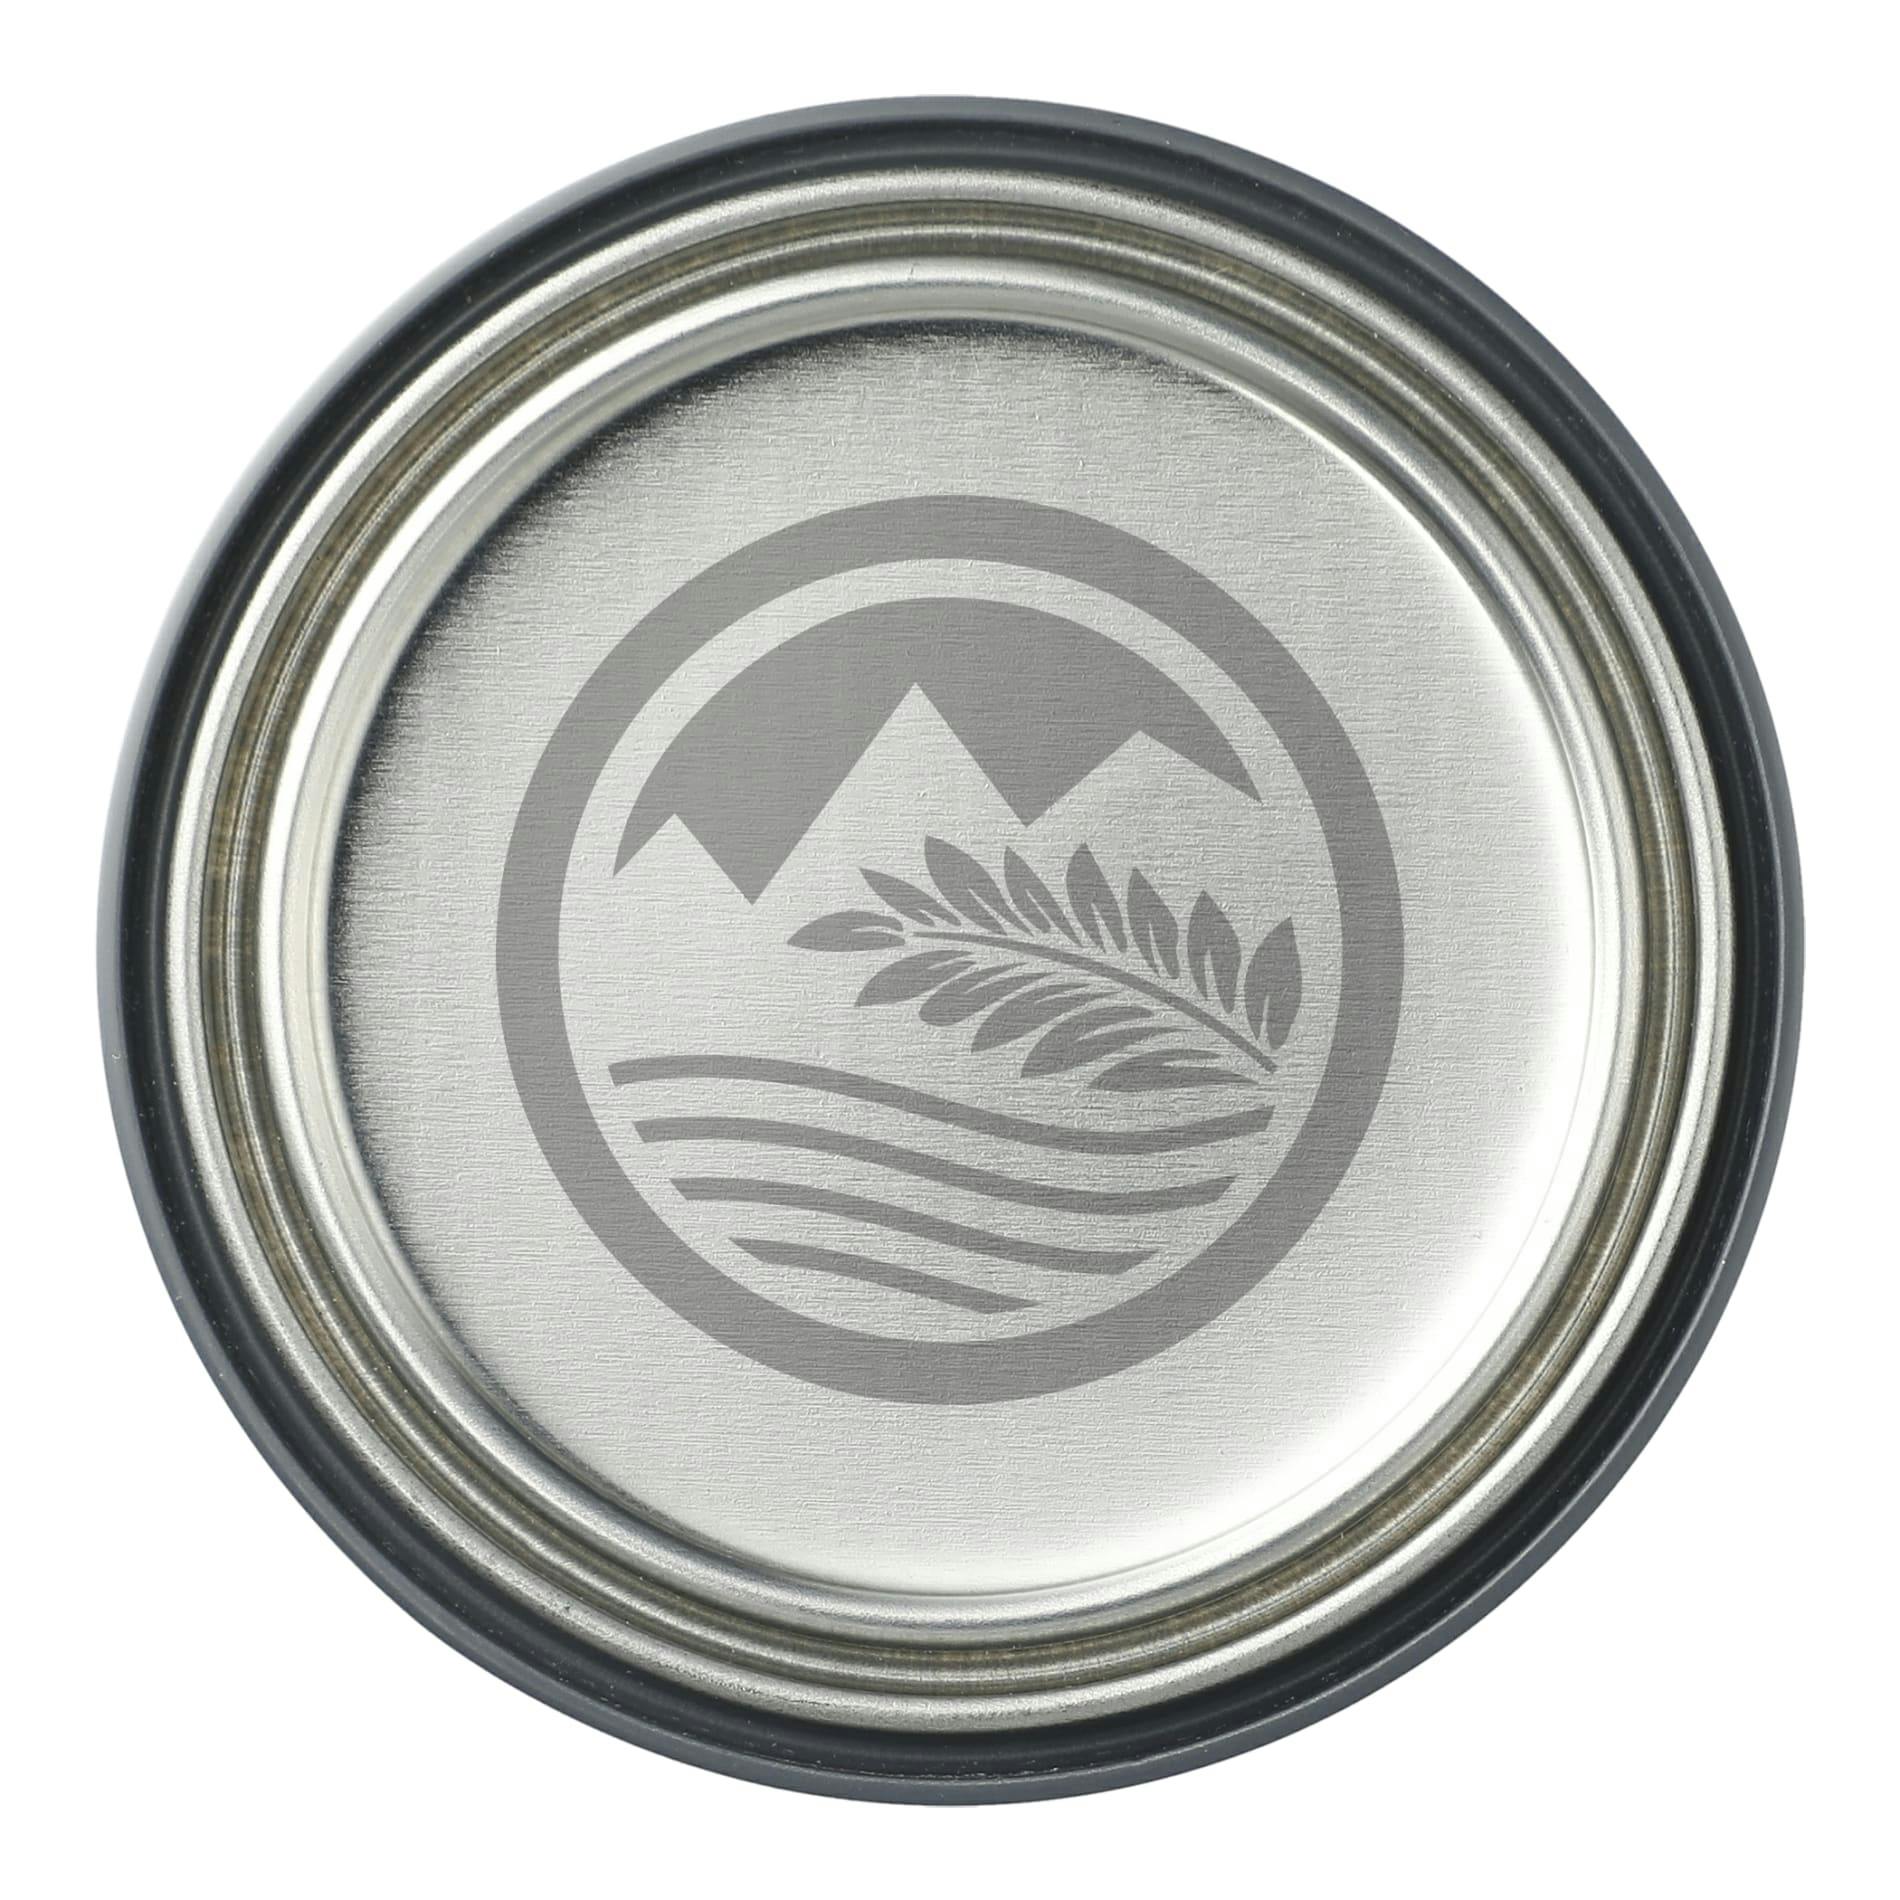 Zion National Park 14 oz Candle - additional Image 1